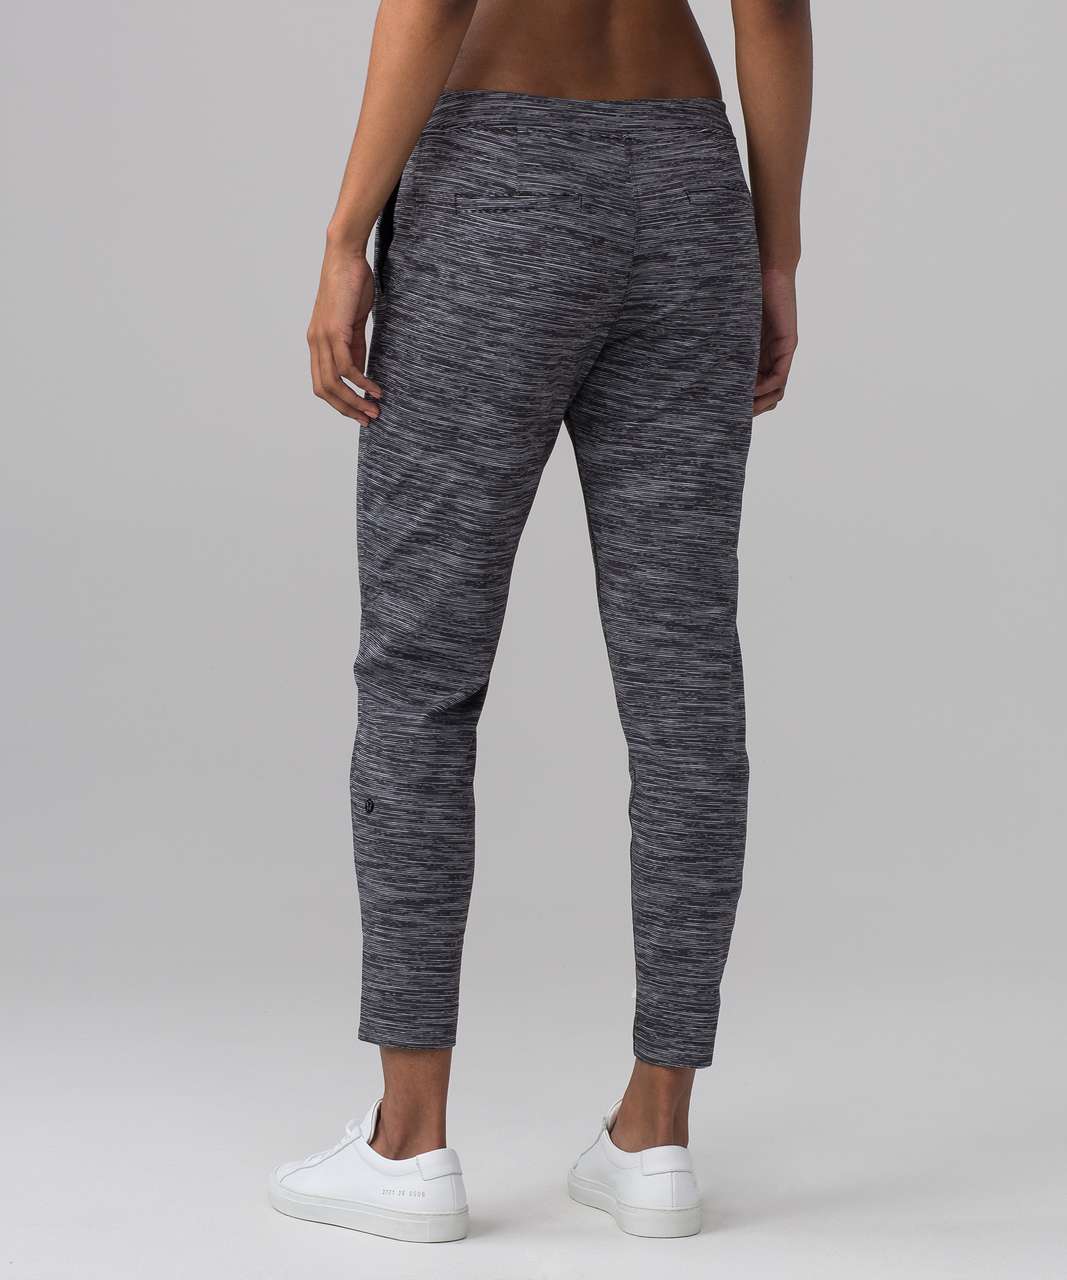 Lululemon Jet Pant - Wee Are From Space Dark Carbon Ice Grey - lulu fanatics